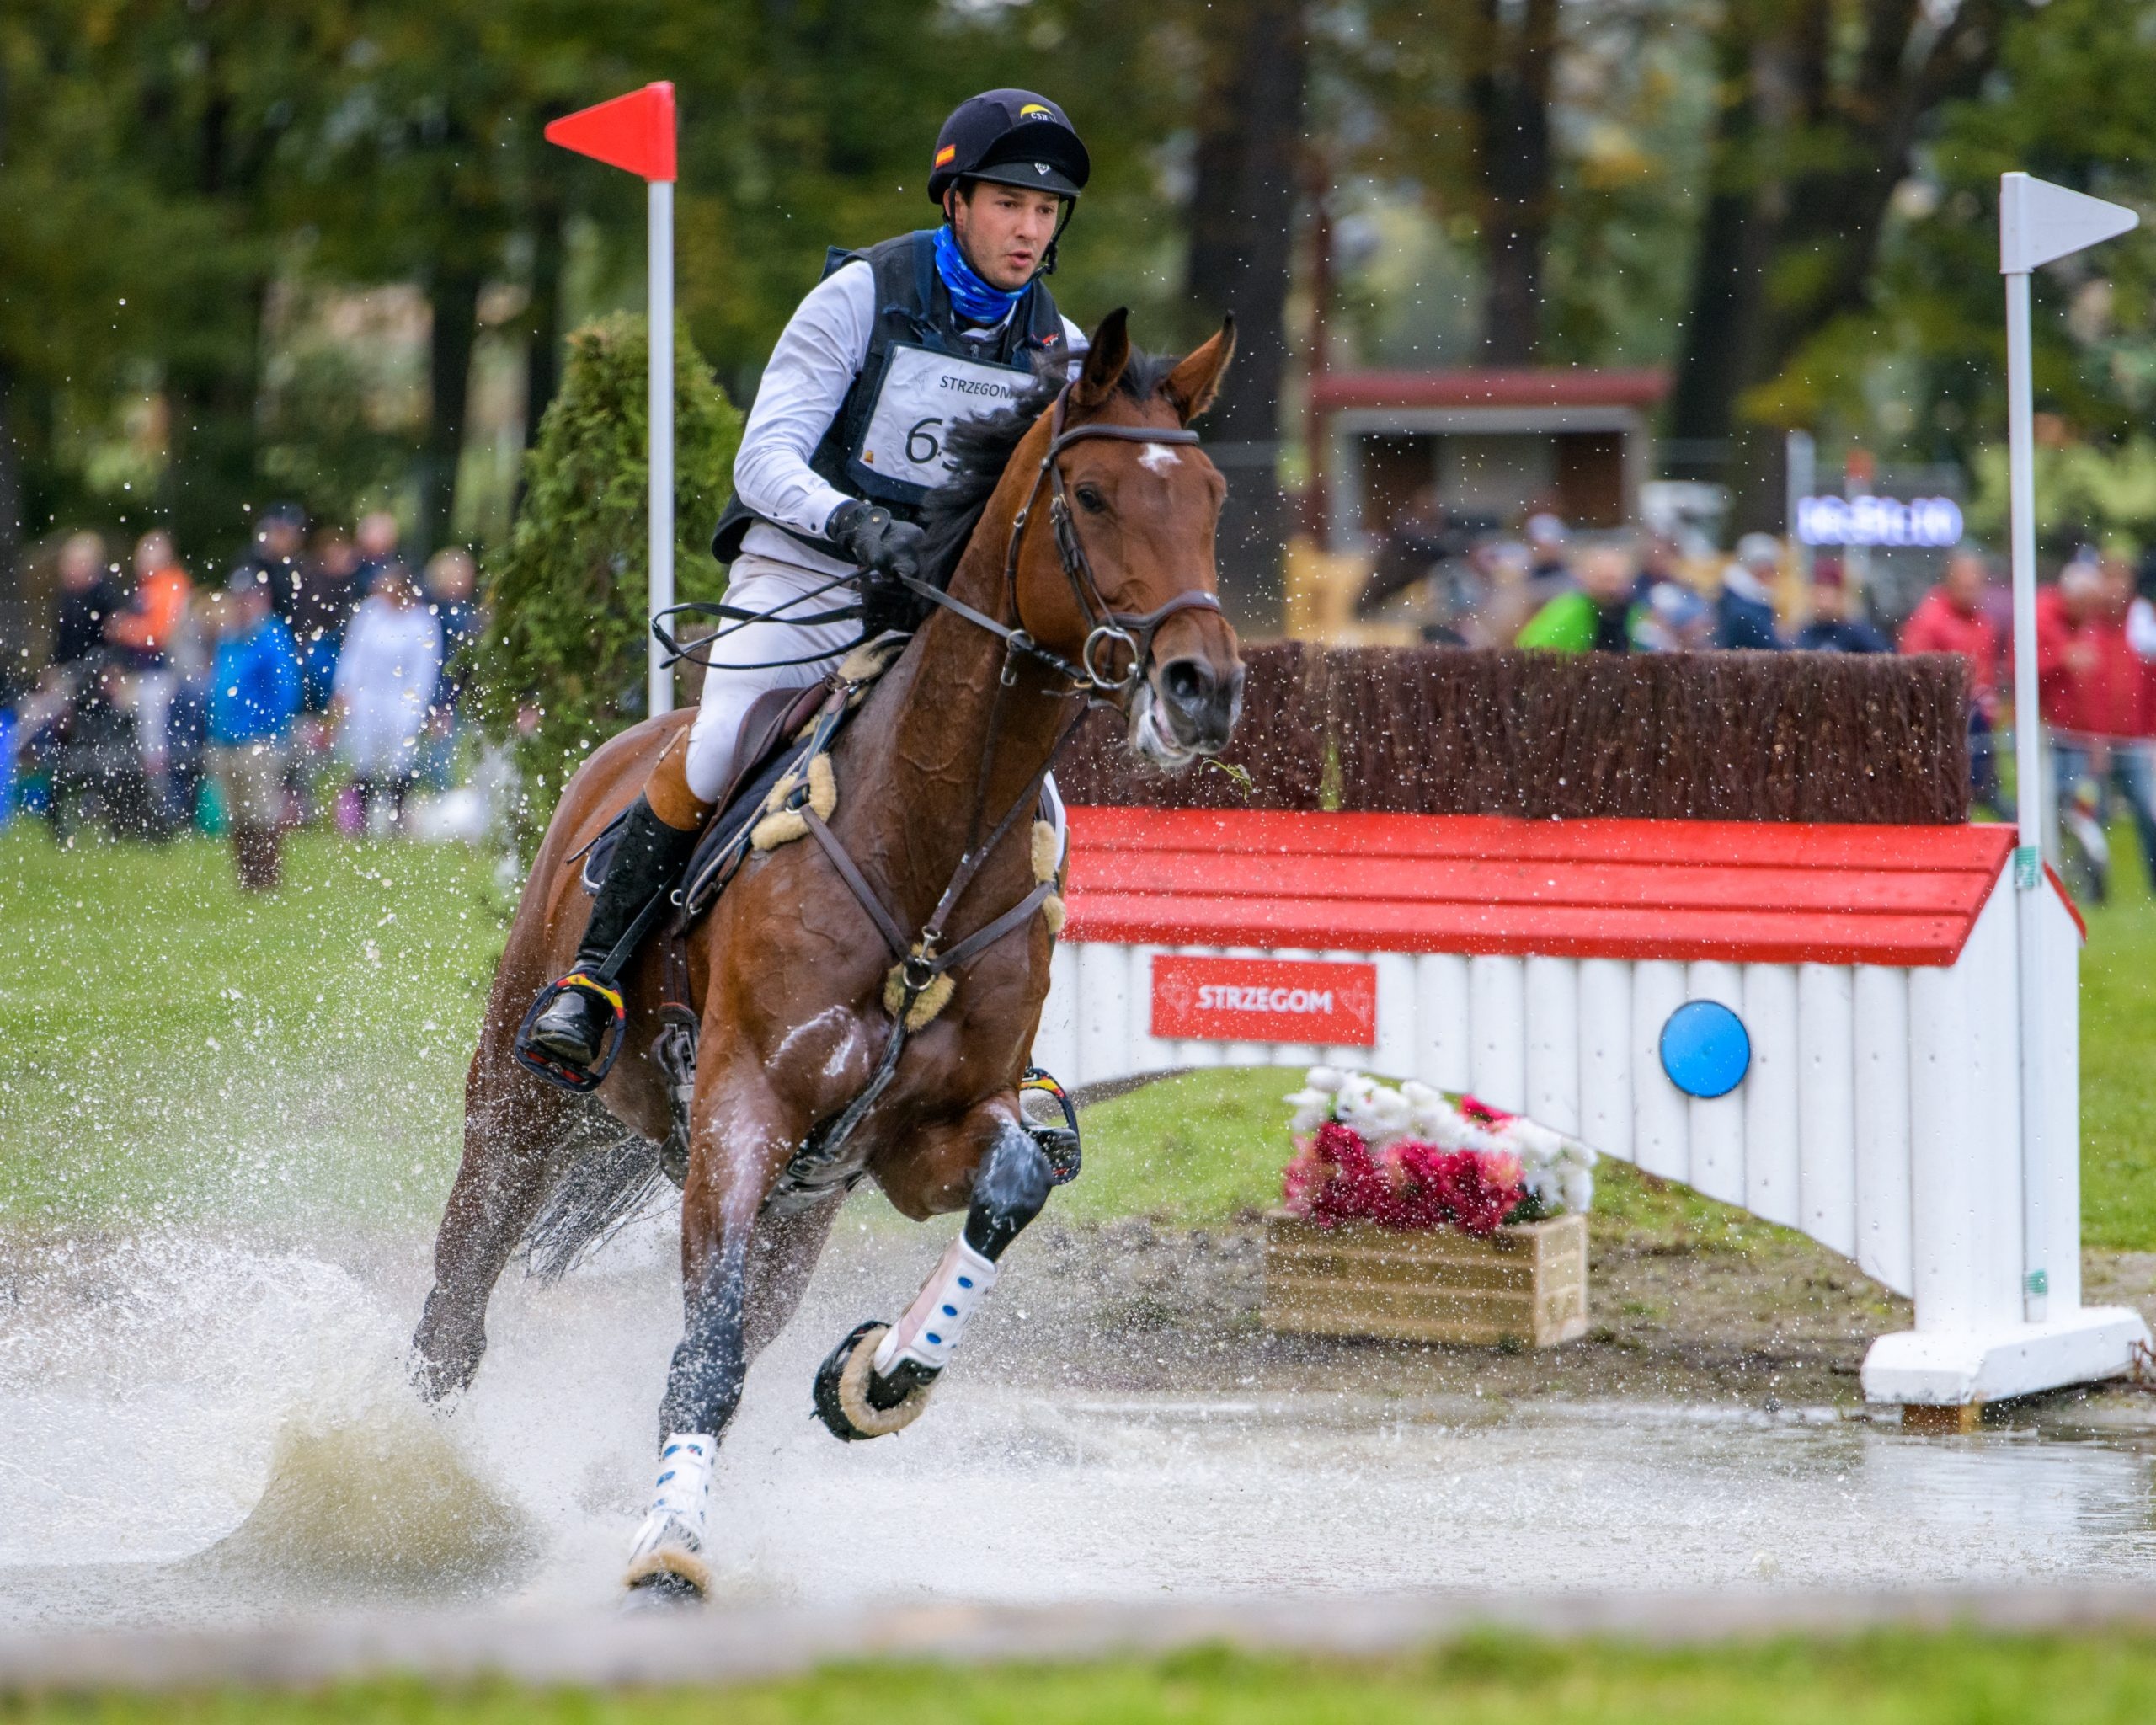 Eventing: Cross country equestrian jumping, An endurance test and one of the three phases of the sport of horse trials. 2560x2050 HD Wallpaper.